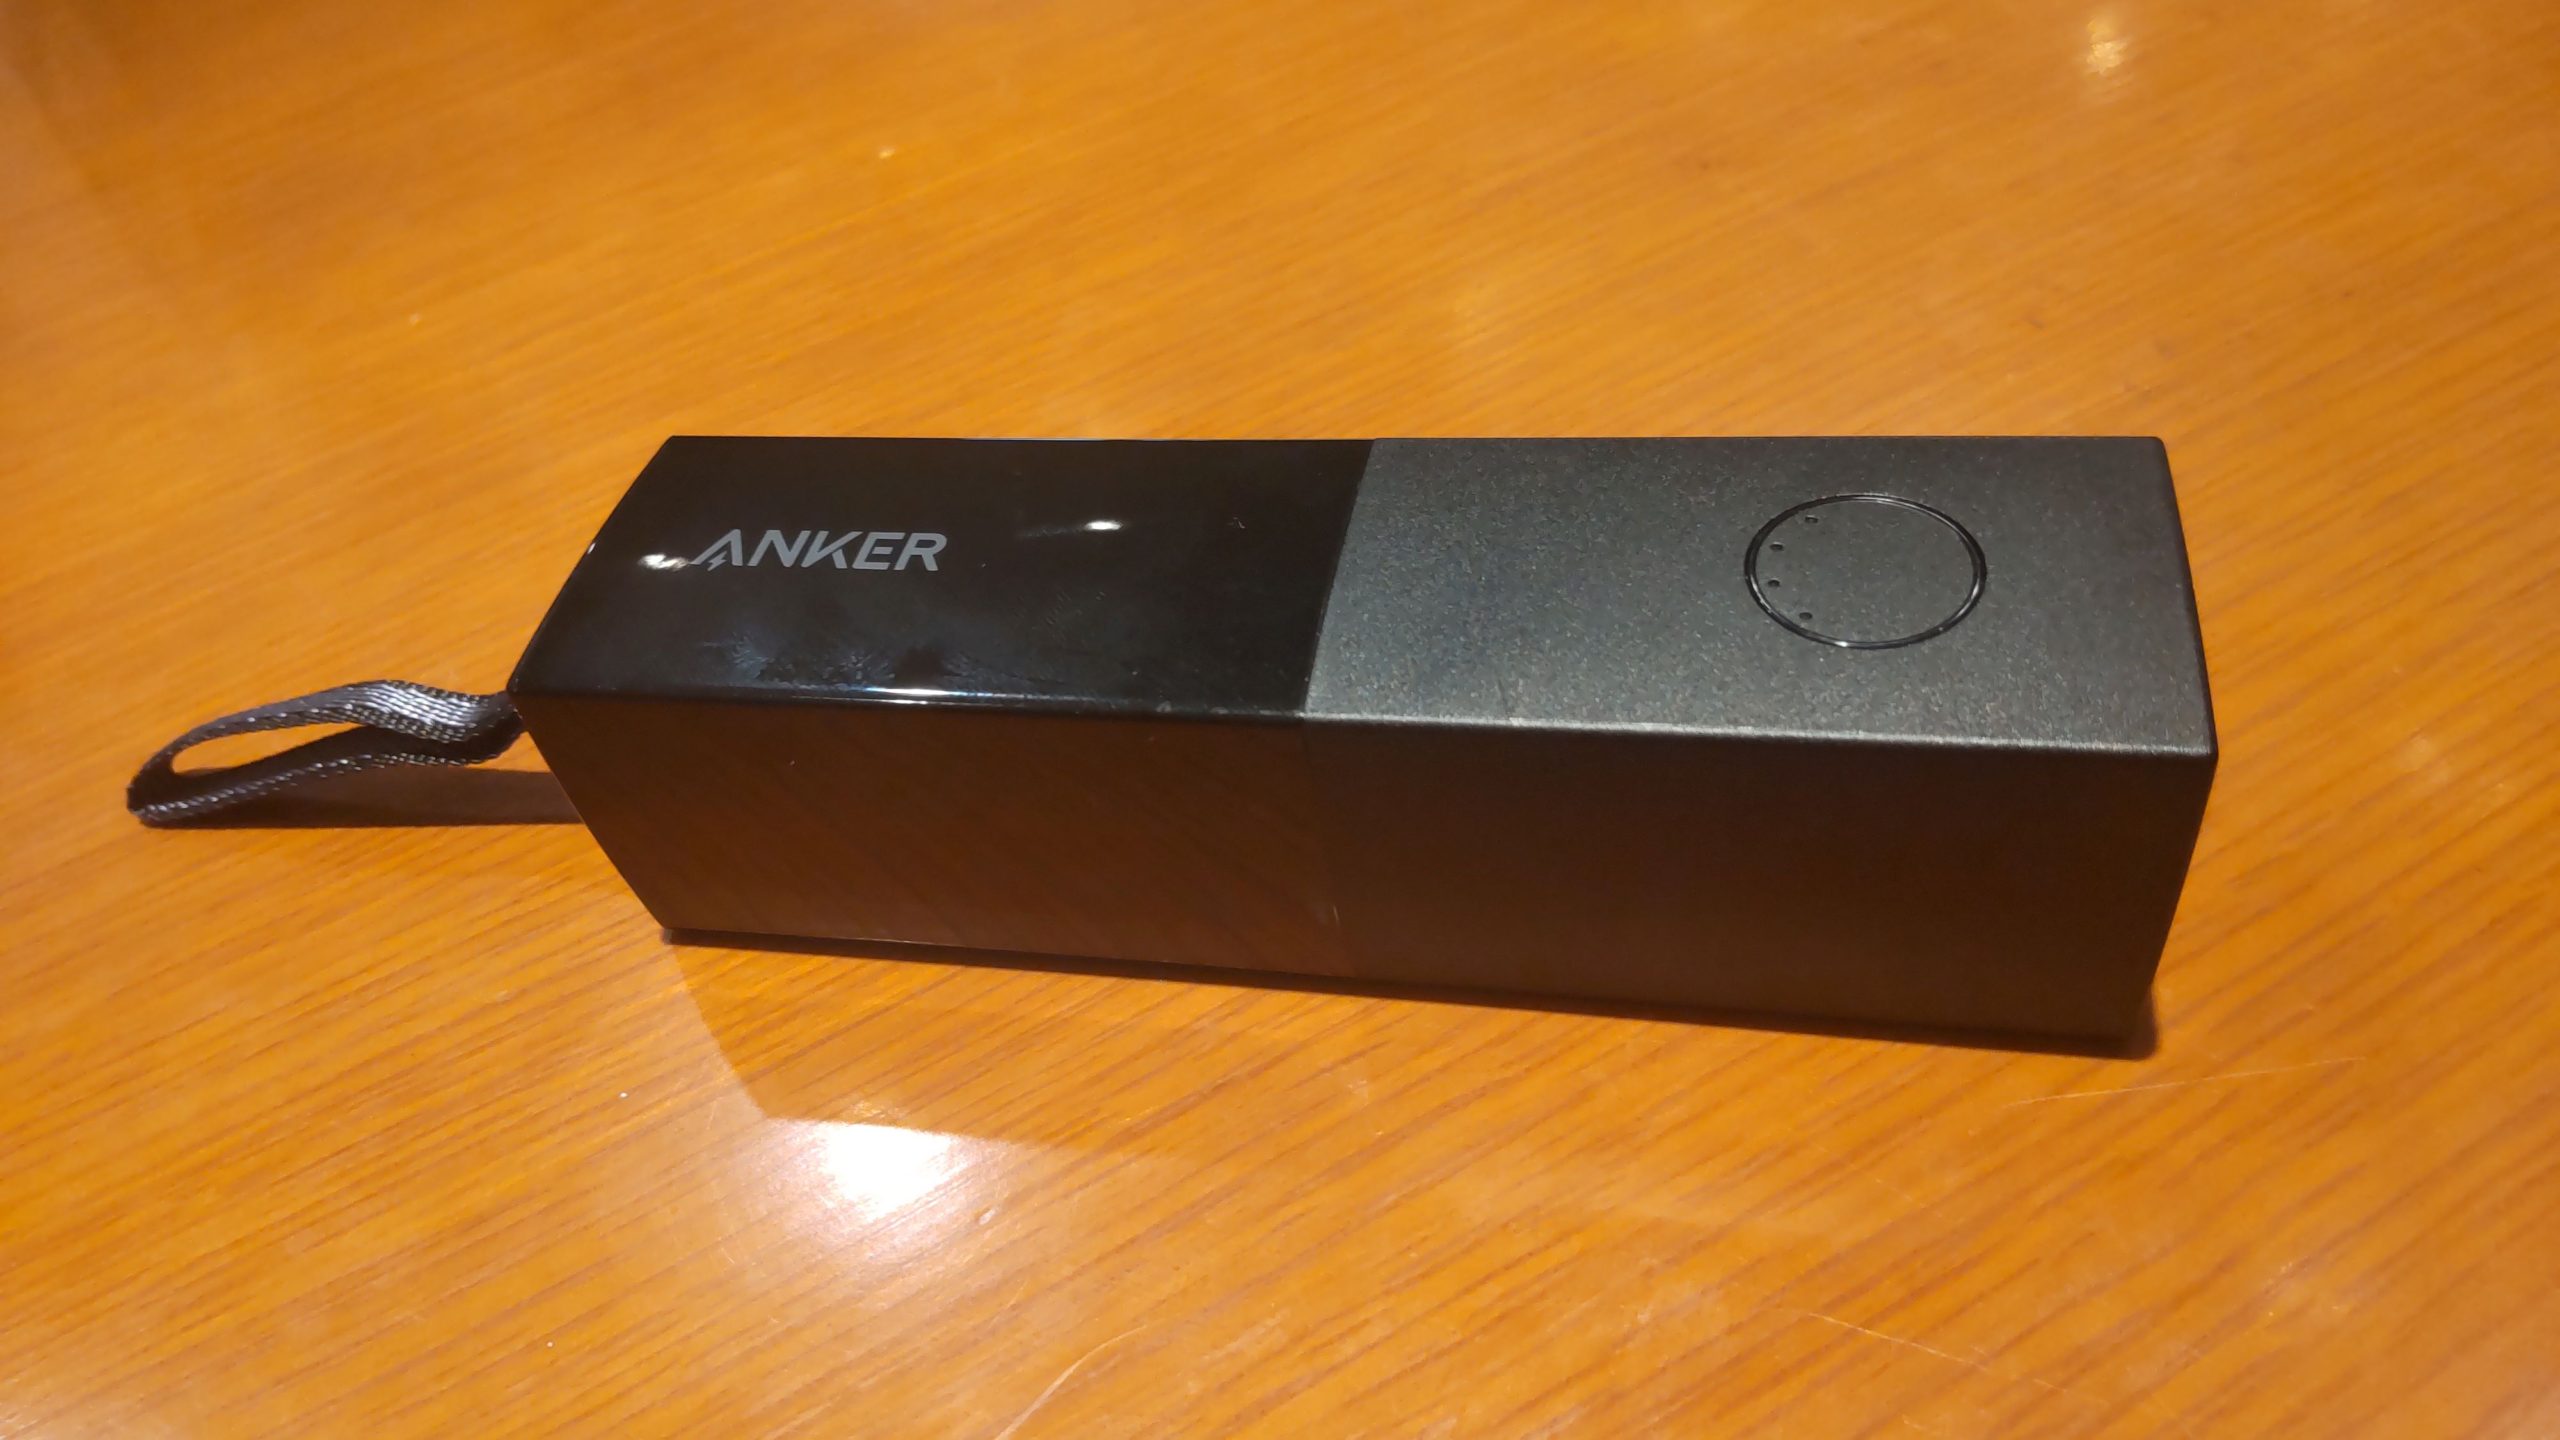 Ankerモバイルバッテリー511 Power Bank (PowerCore Fusion 5000)